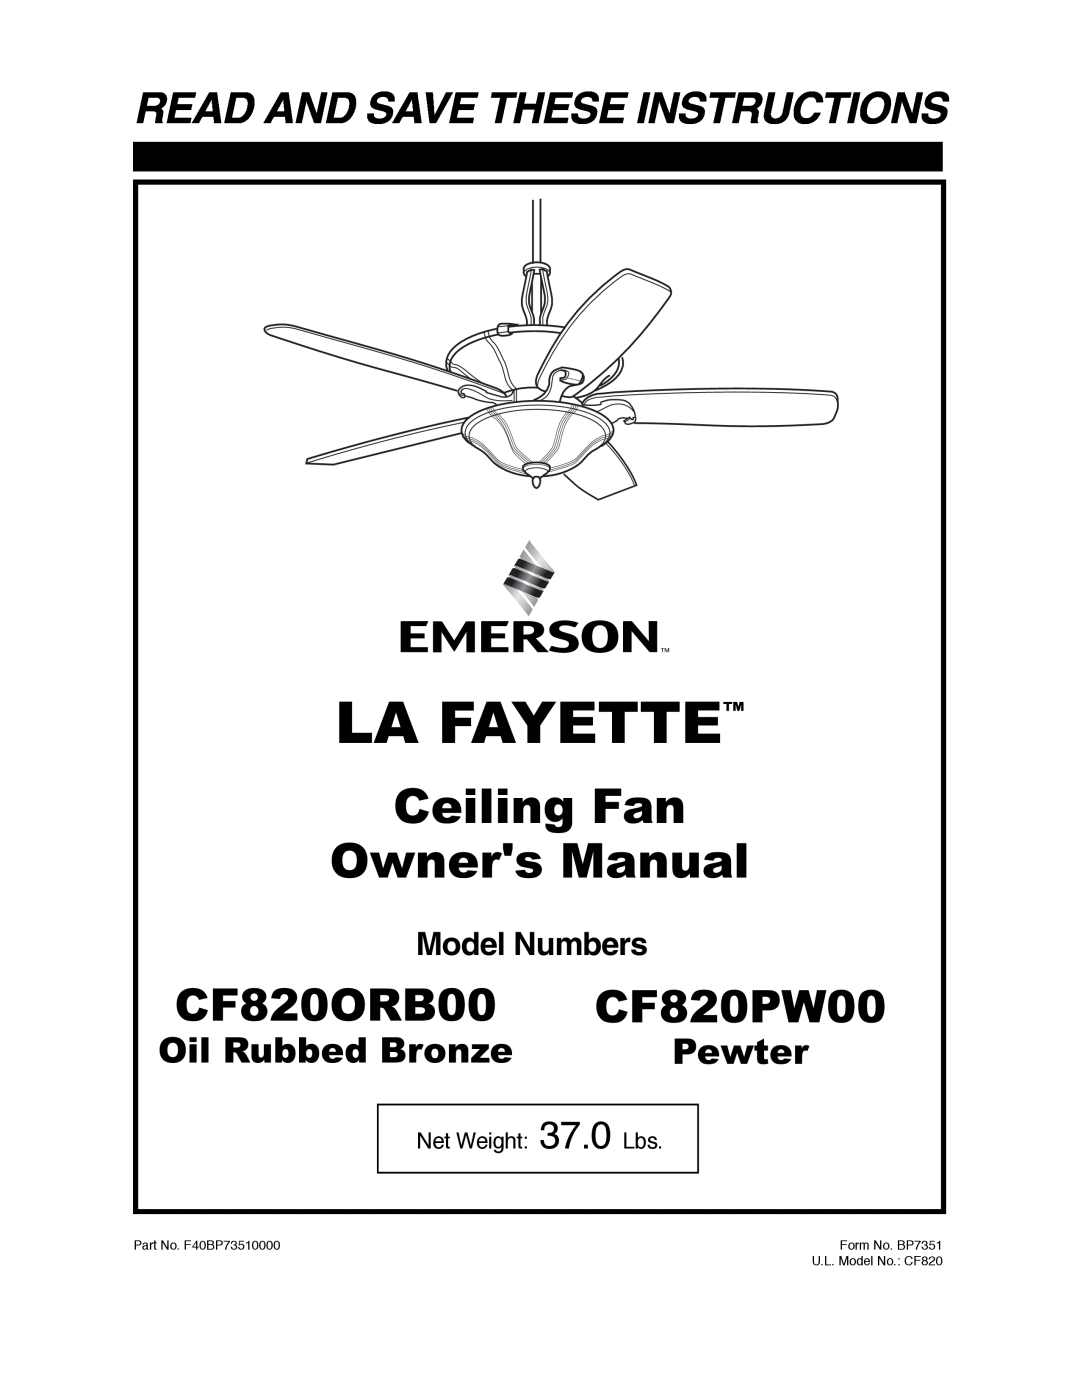 Emerson owner manual La Fayette, CF820ORB00 CF820PW00, Read And Save These Instructions, Oil Rubbed Bronze, Pewter 